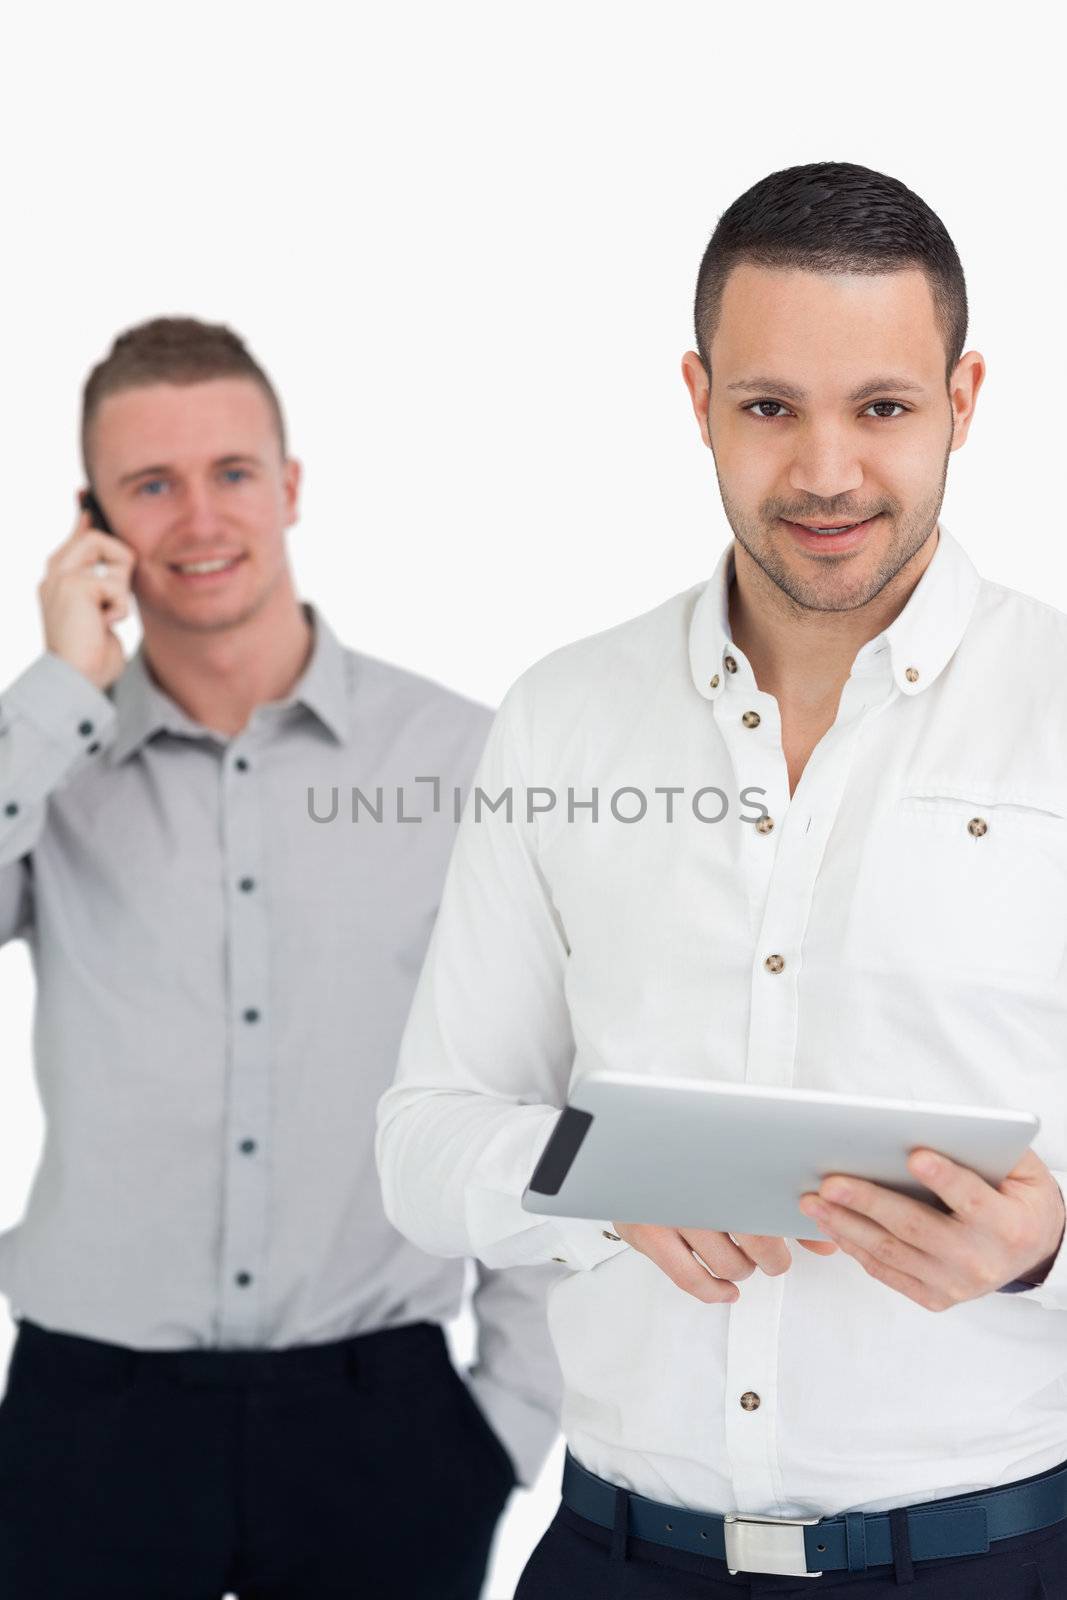 Two smiling men using phone and tablet computer against a white background